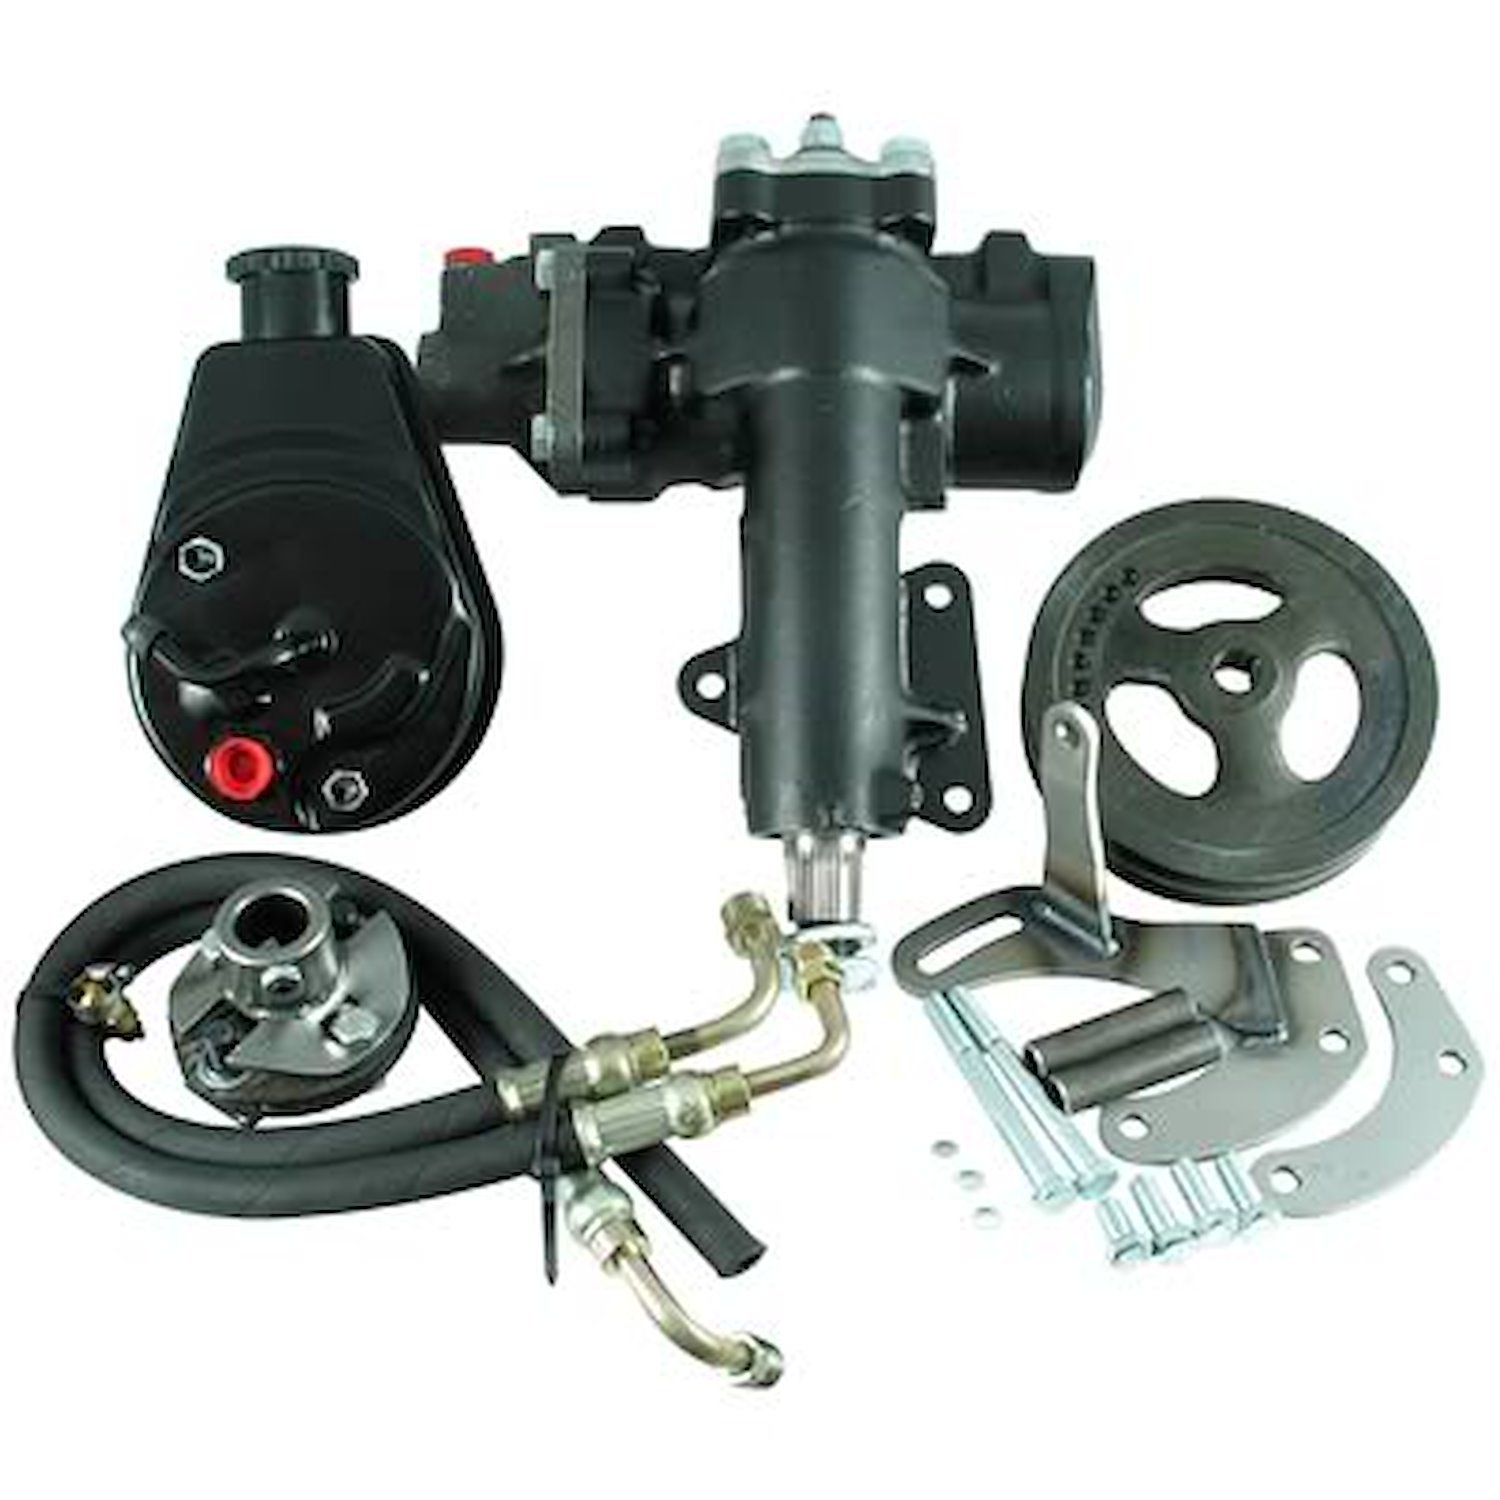 Complete Power Steering Conversion Kit 1967-82 Corvette with Factory Manual Steering